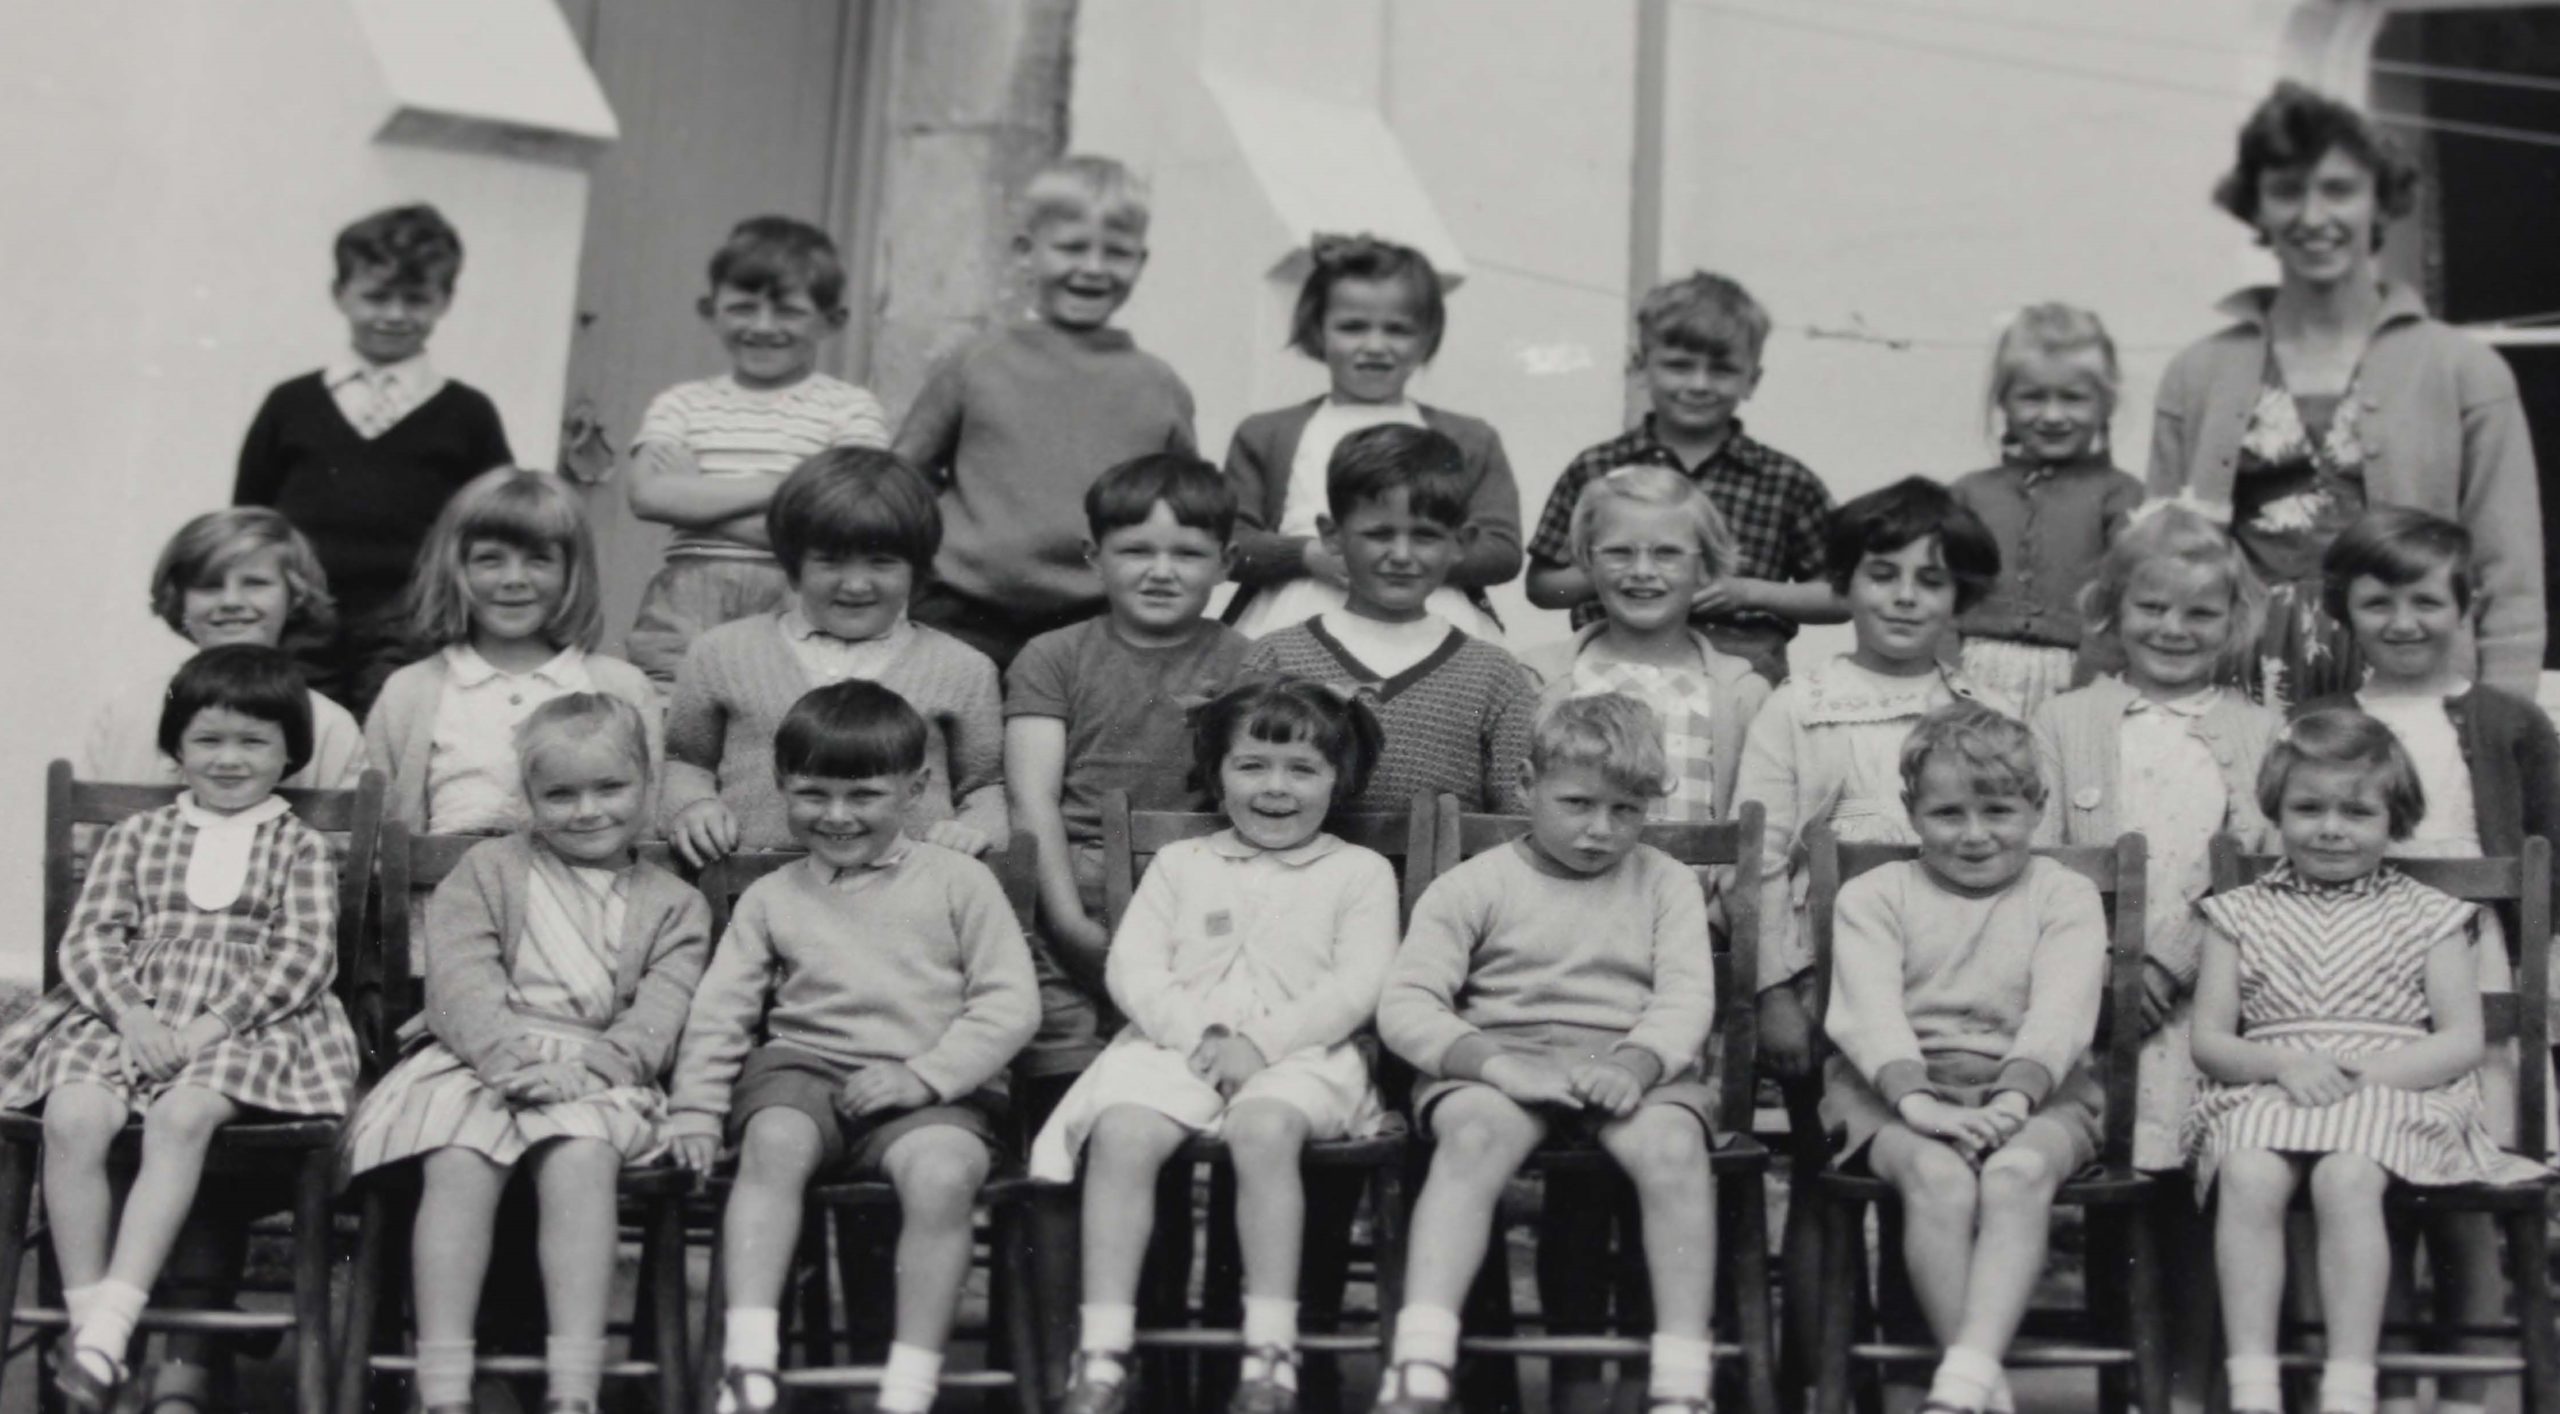 Port Isaac School in the 1930s